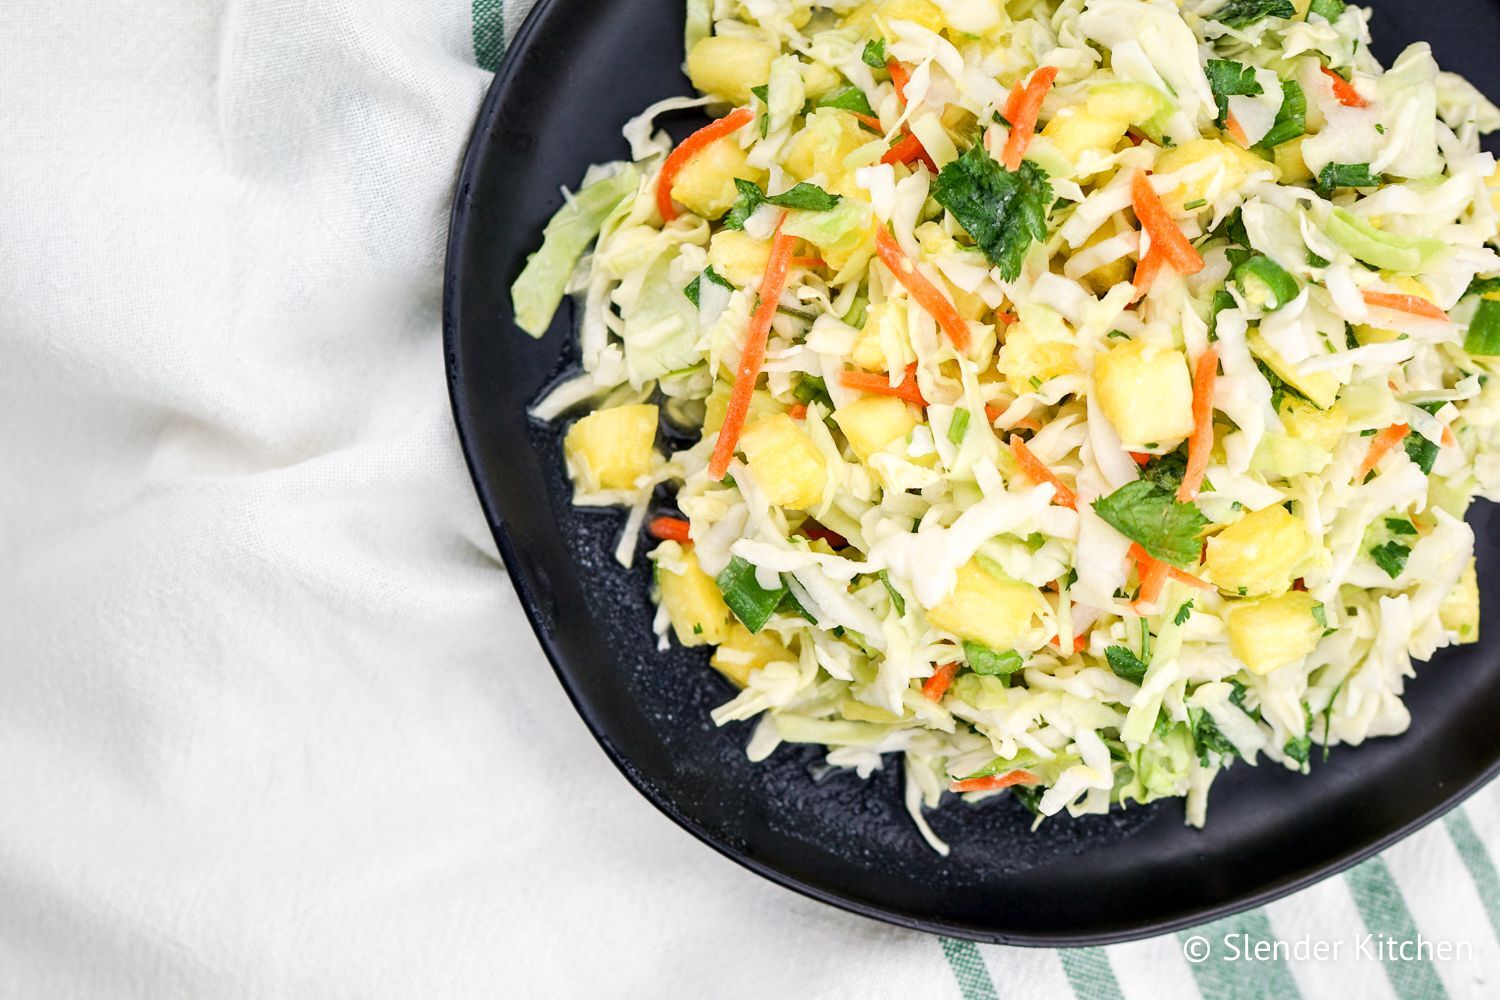 Pineapple coleslaw with carrots, pineapple, cabbage, cilantro, and coconut dressing in a bowl.